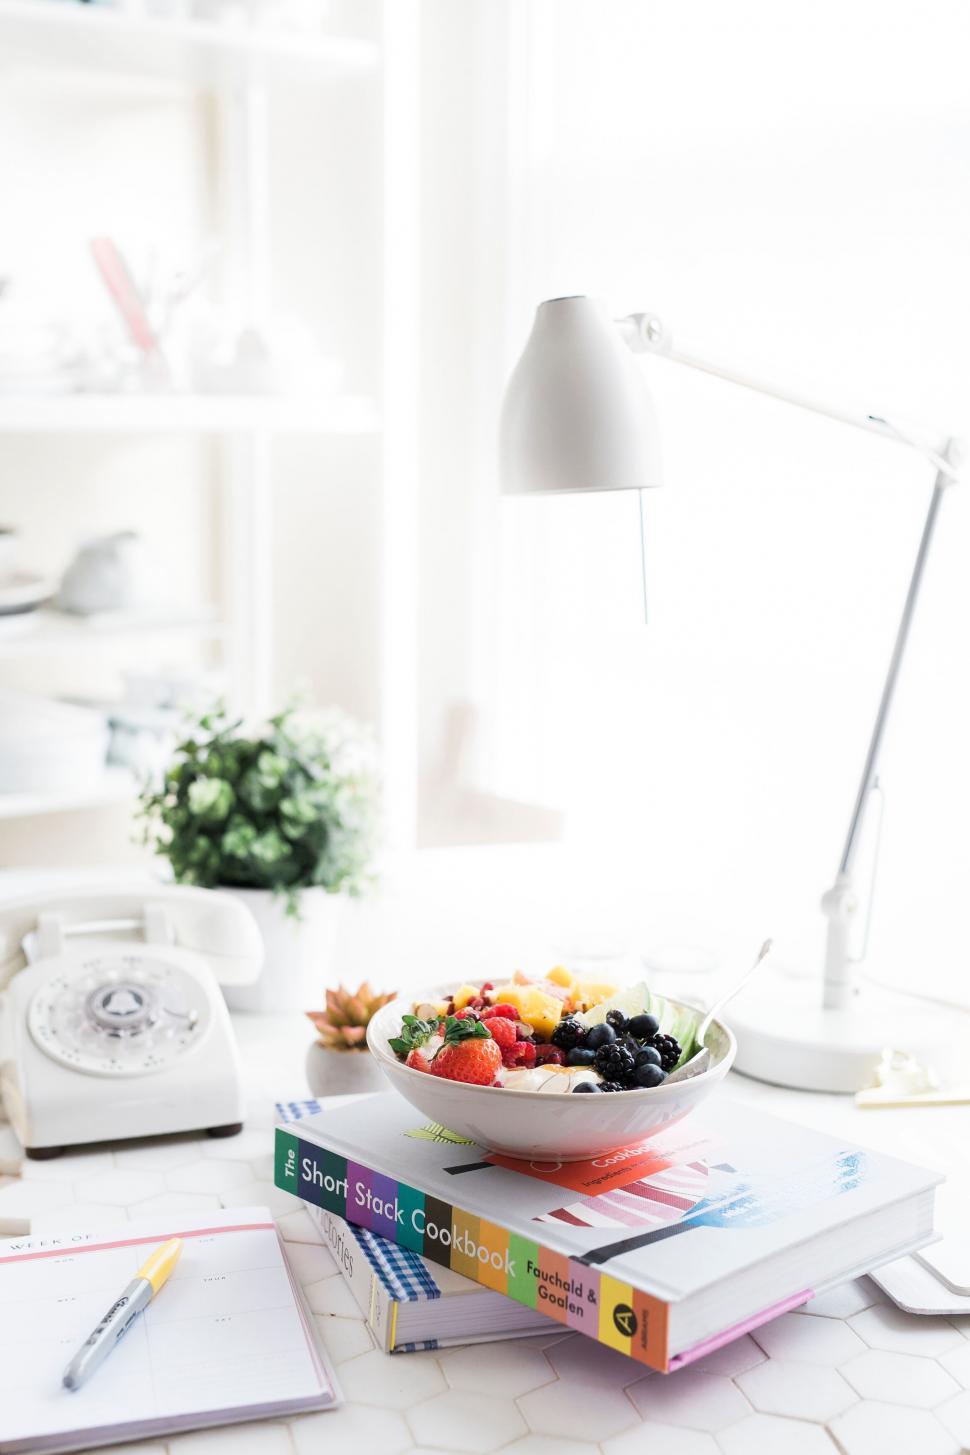 Free Image of Bright kitchen with healthy fruit salad 